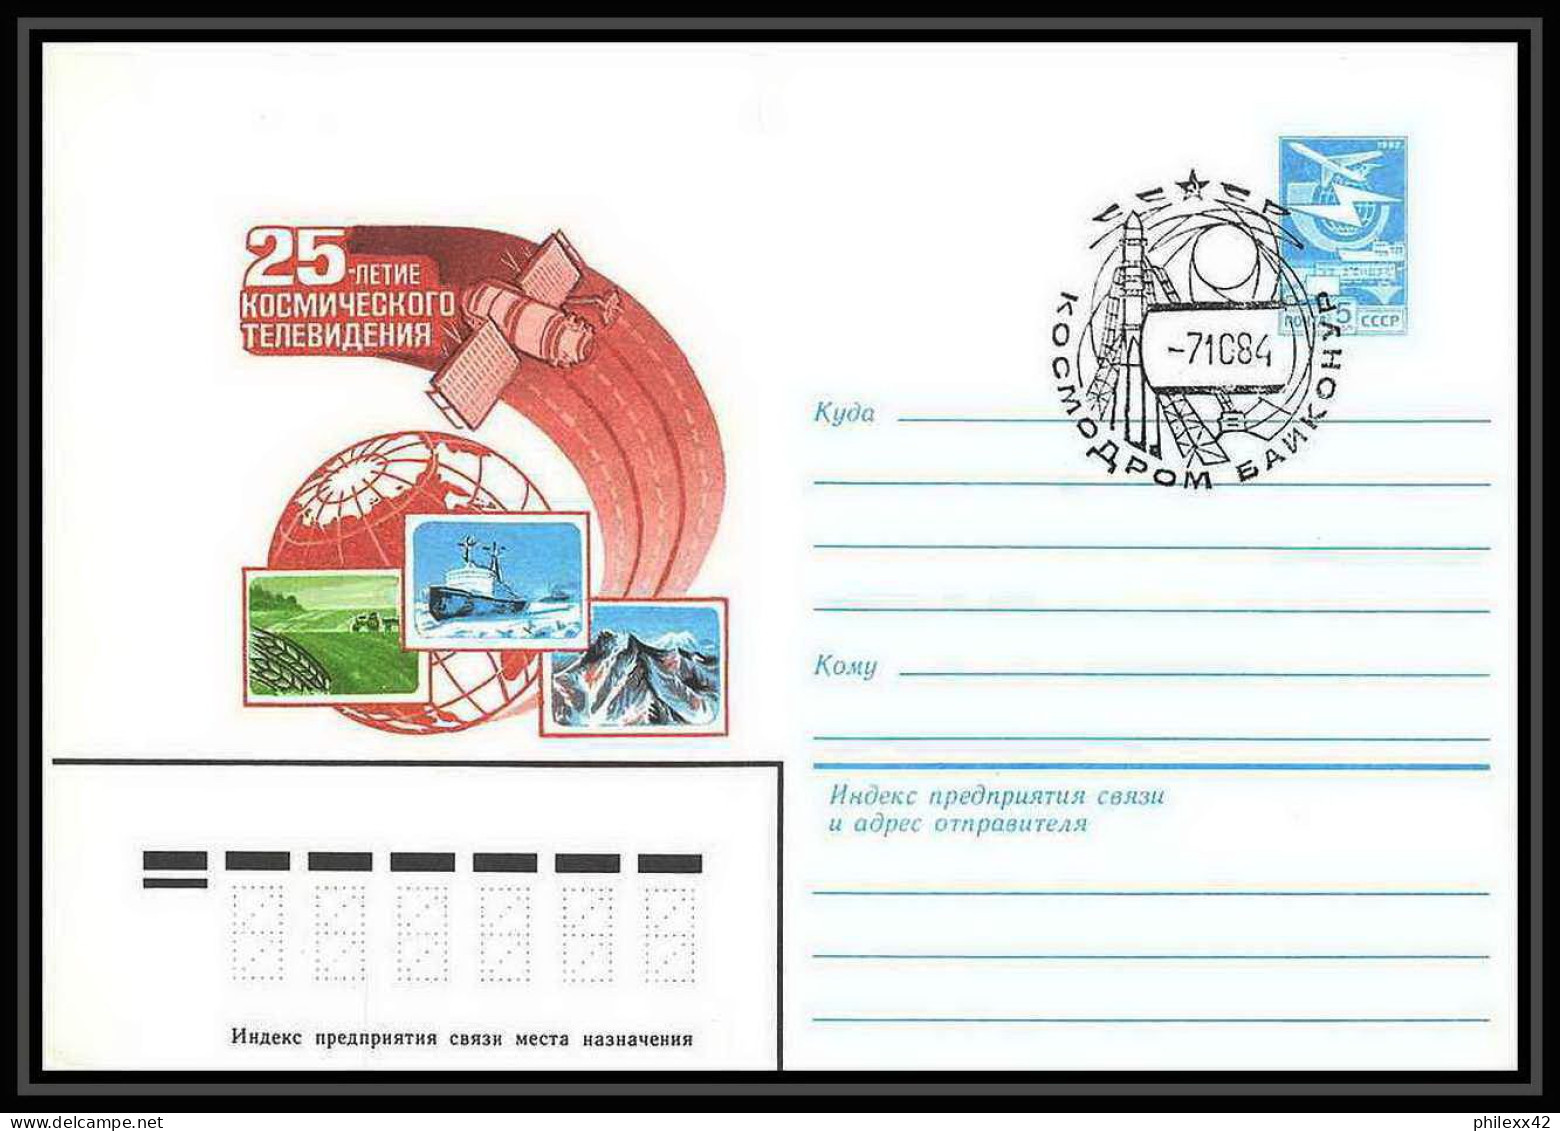 9154/ Espace (space Raumfahrt) Entier Postal (Stamped Stationery) 7/10/1984 (Russia Urss USSR) - Russia & USSR